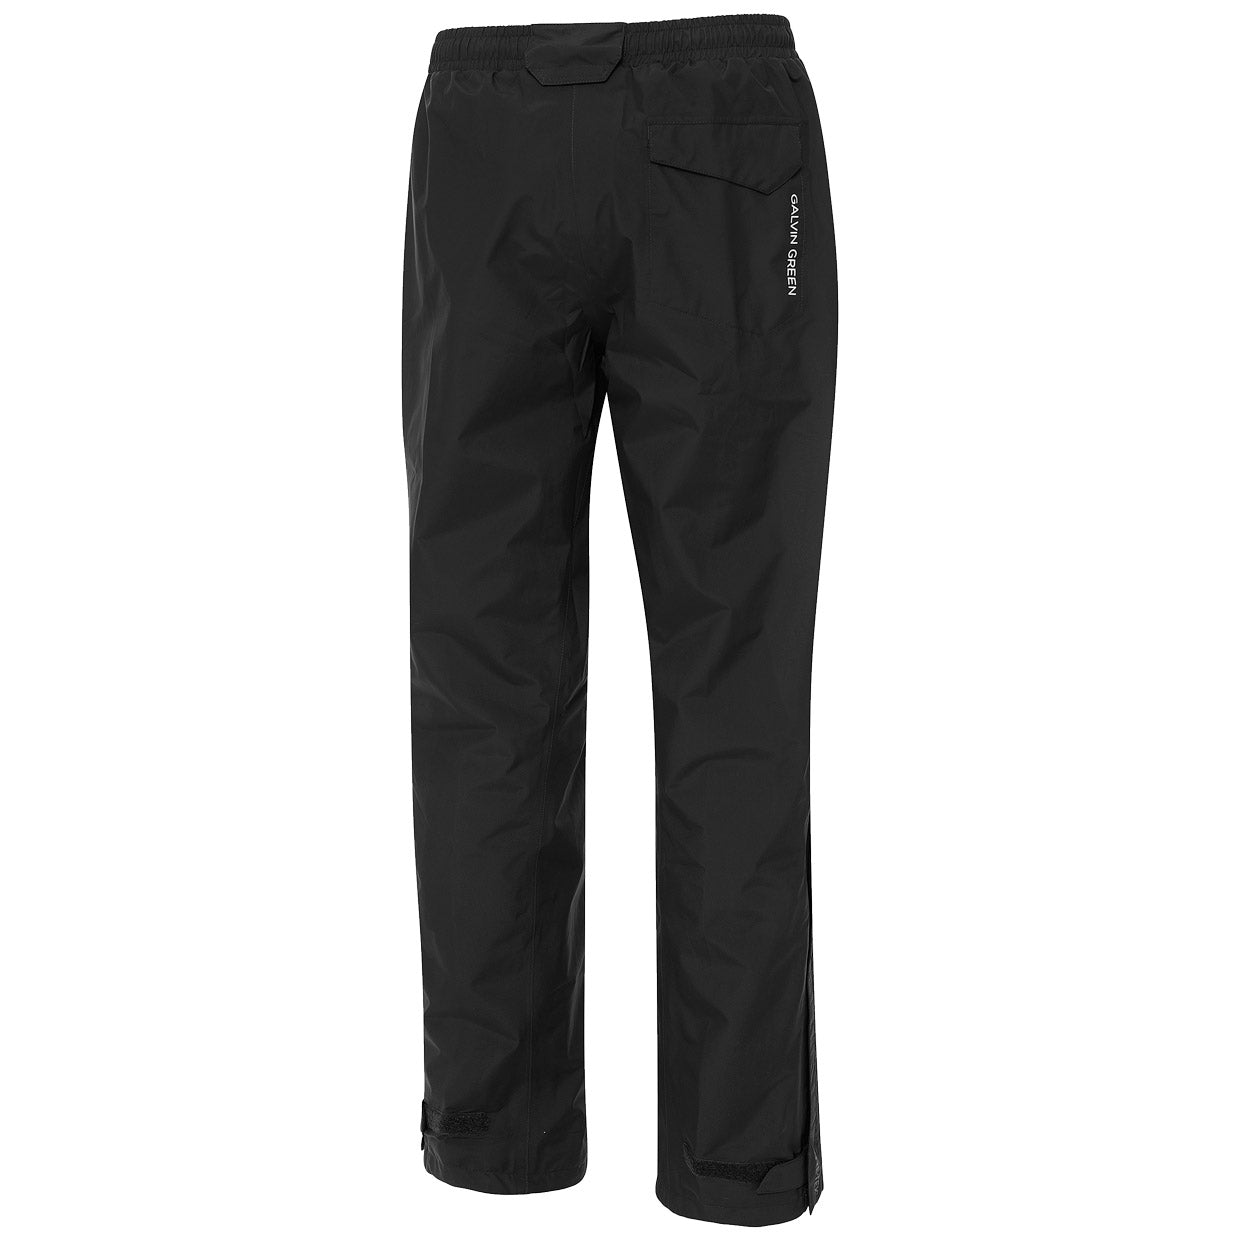 Galvin Green Nixon Trouser Navy - Clubhouse Golf